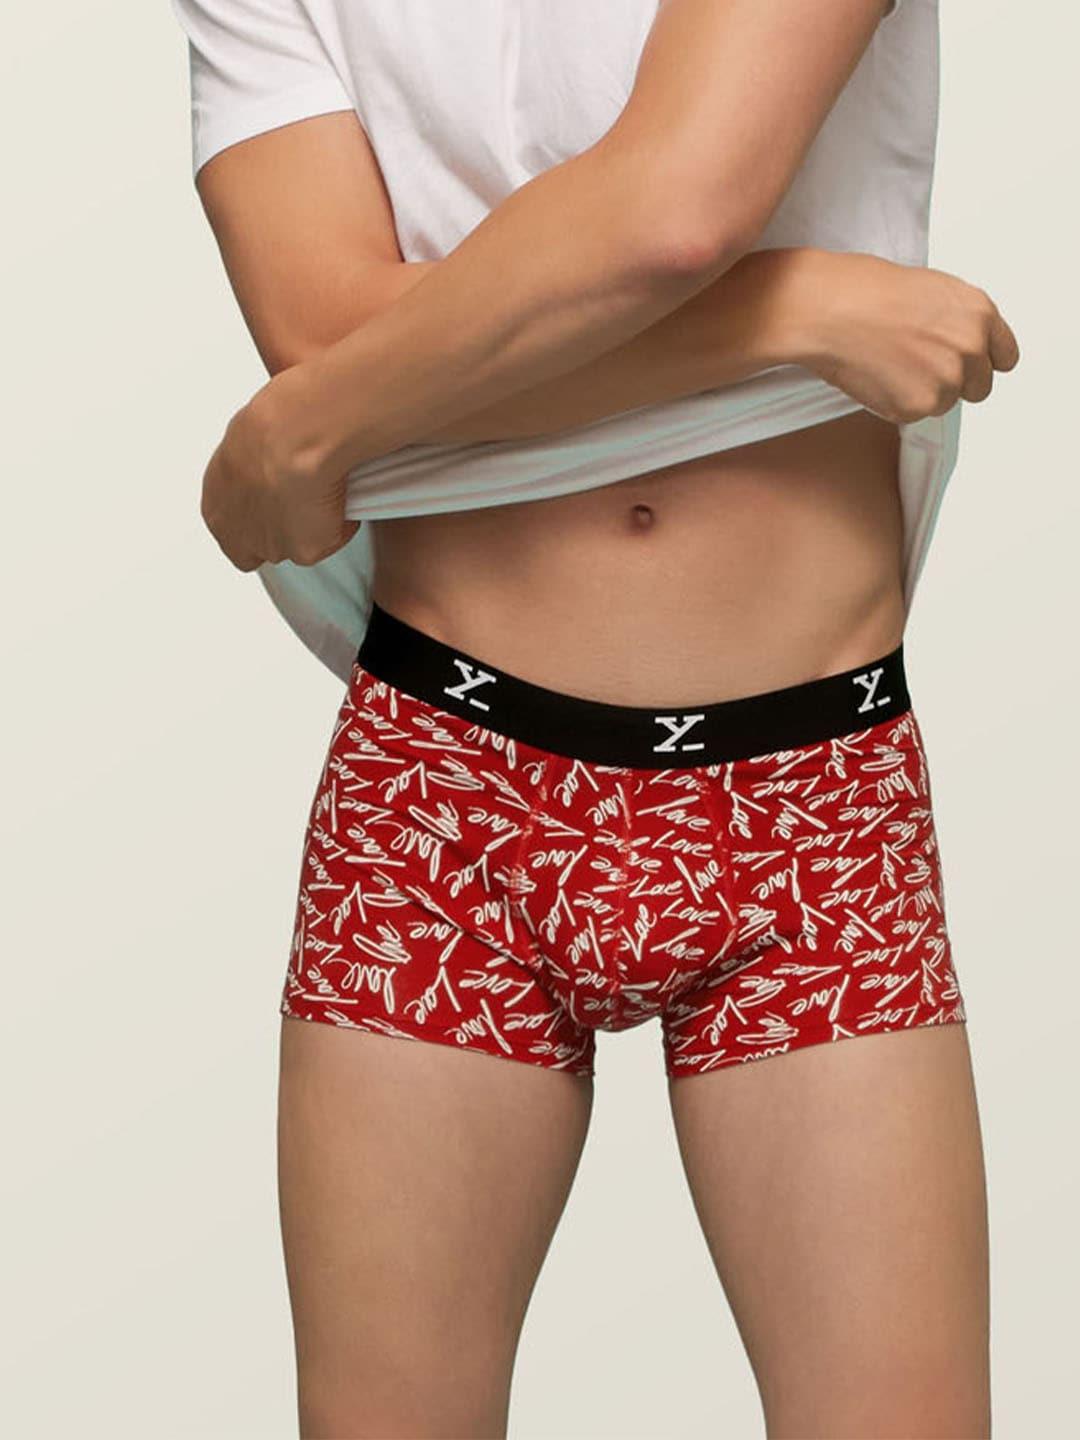 XYXX Men Red & White Printed Shuffle IntelliSoft Antimicrobial Micro Modal Trunks XYTRNK86